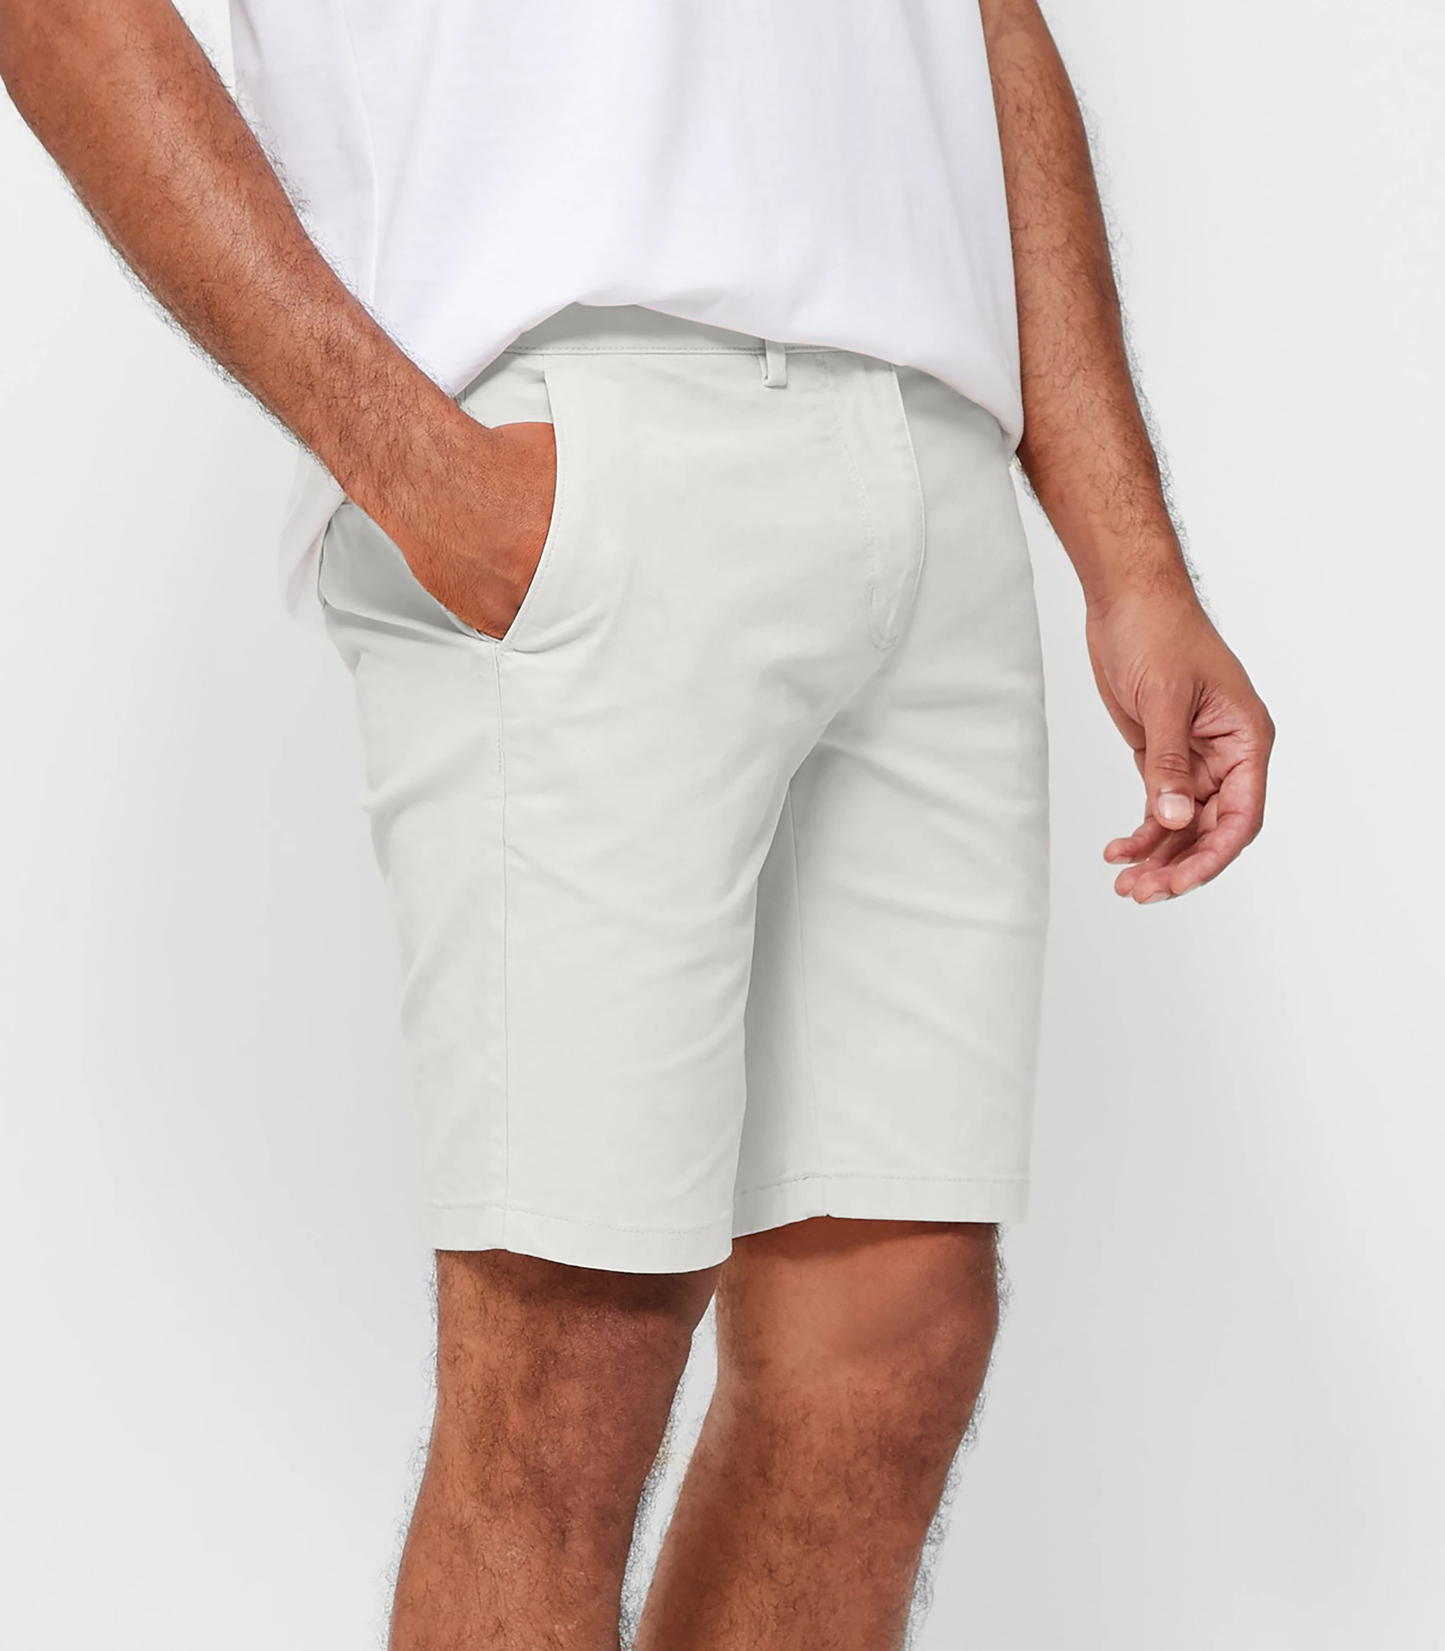 Mens White chinos shorts with front slanted pockets, jetted back pockets. zip fly fastening and brown horne buttons on the waistband and back pockets, the fit is a slim fit, this is worn with a white tee and white t-shirt